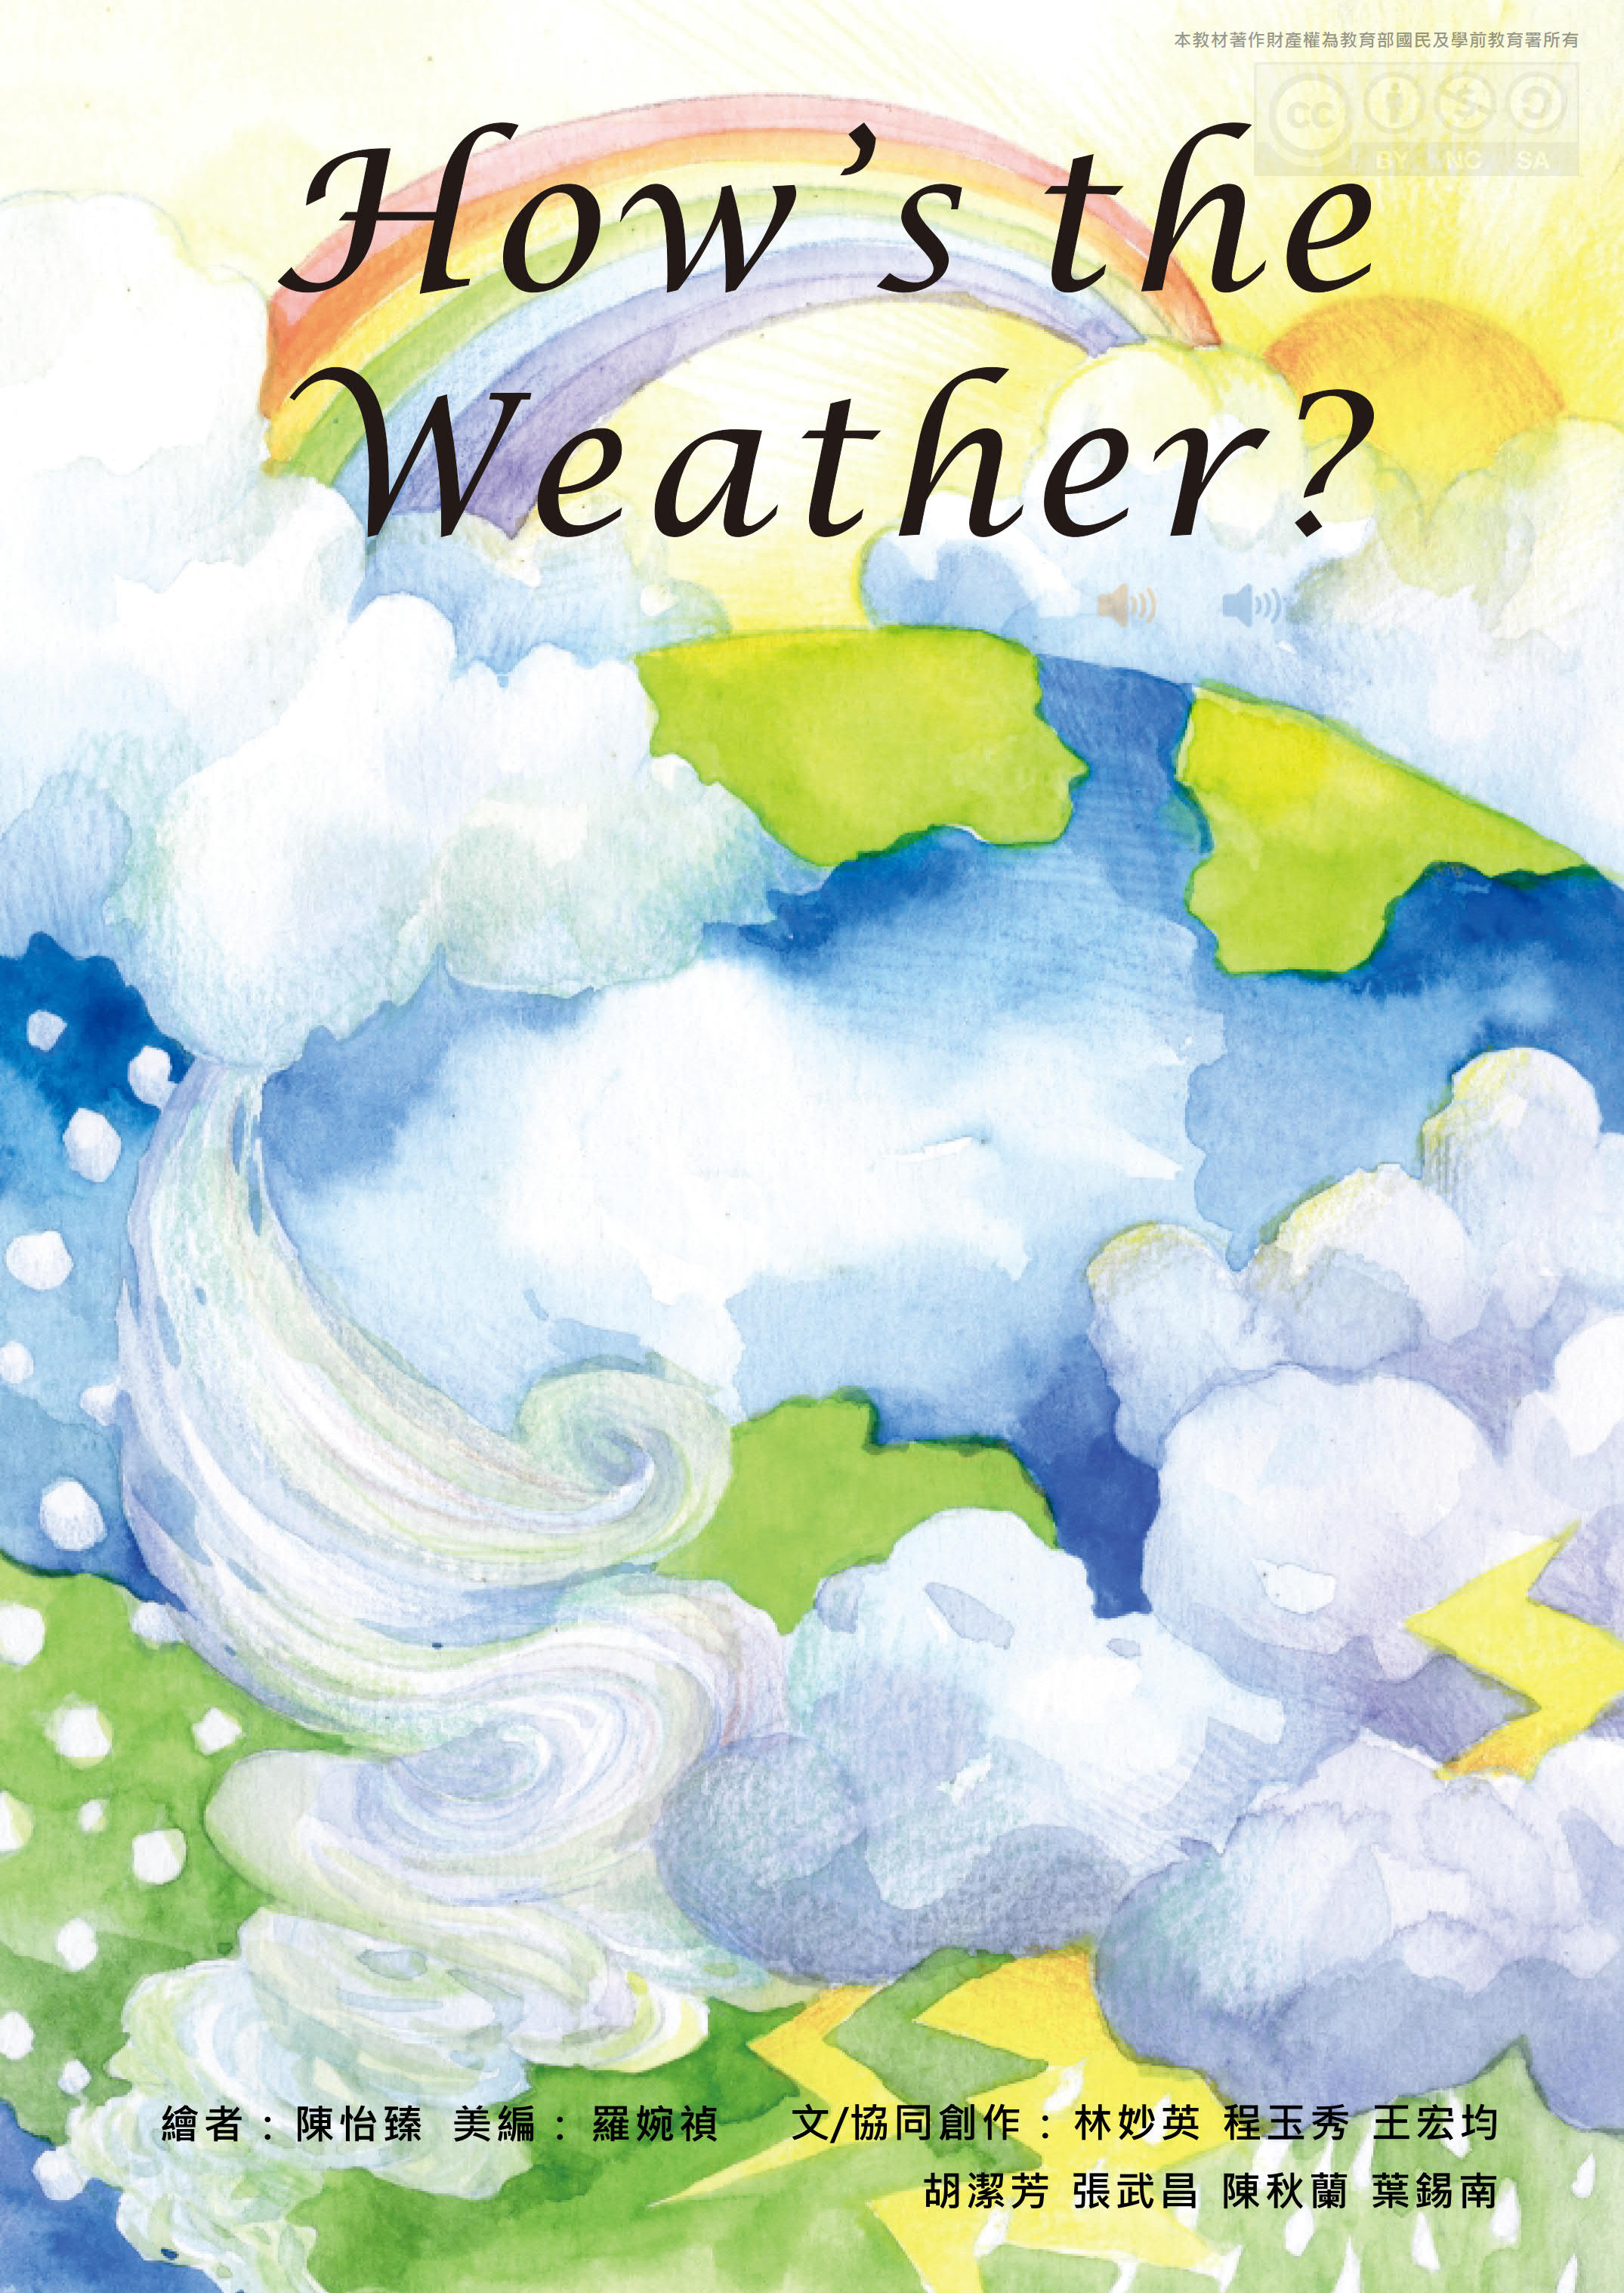 Unit 4,7 How’s the Weather?(繪本圖示)